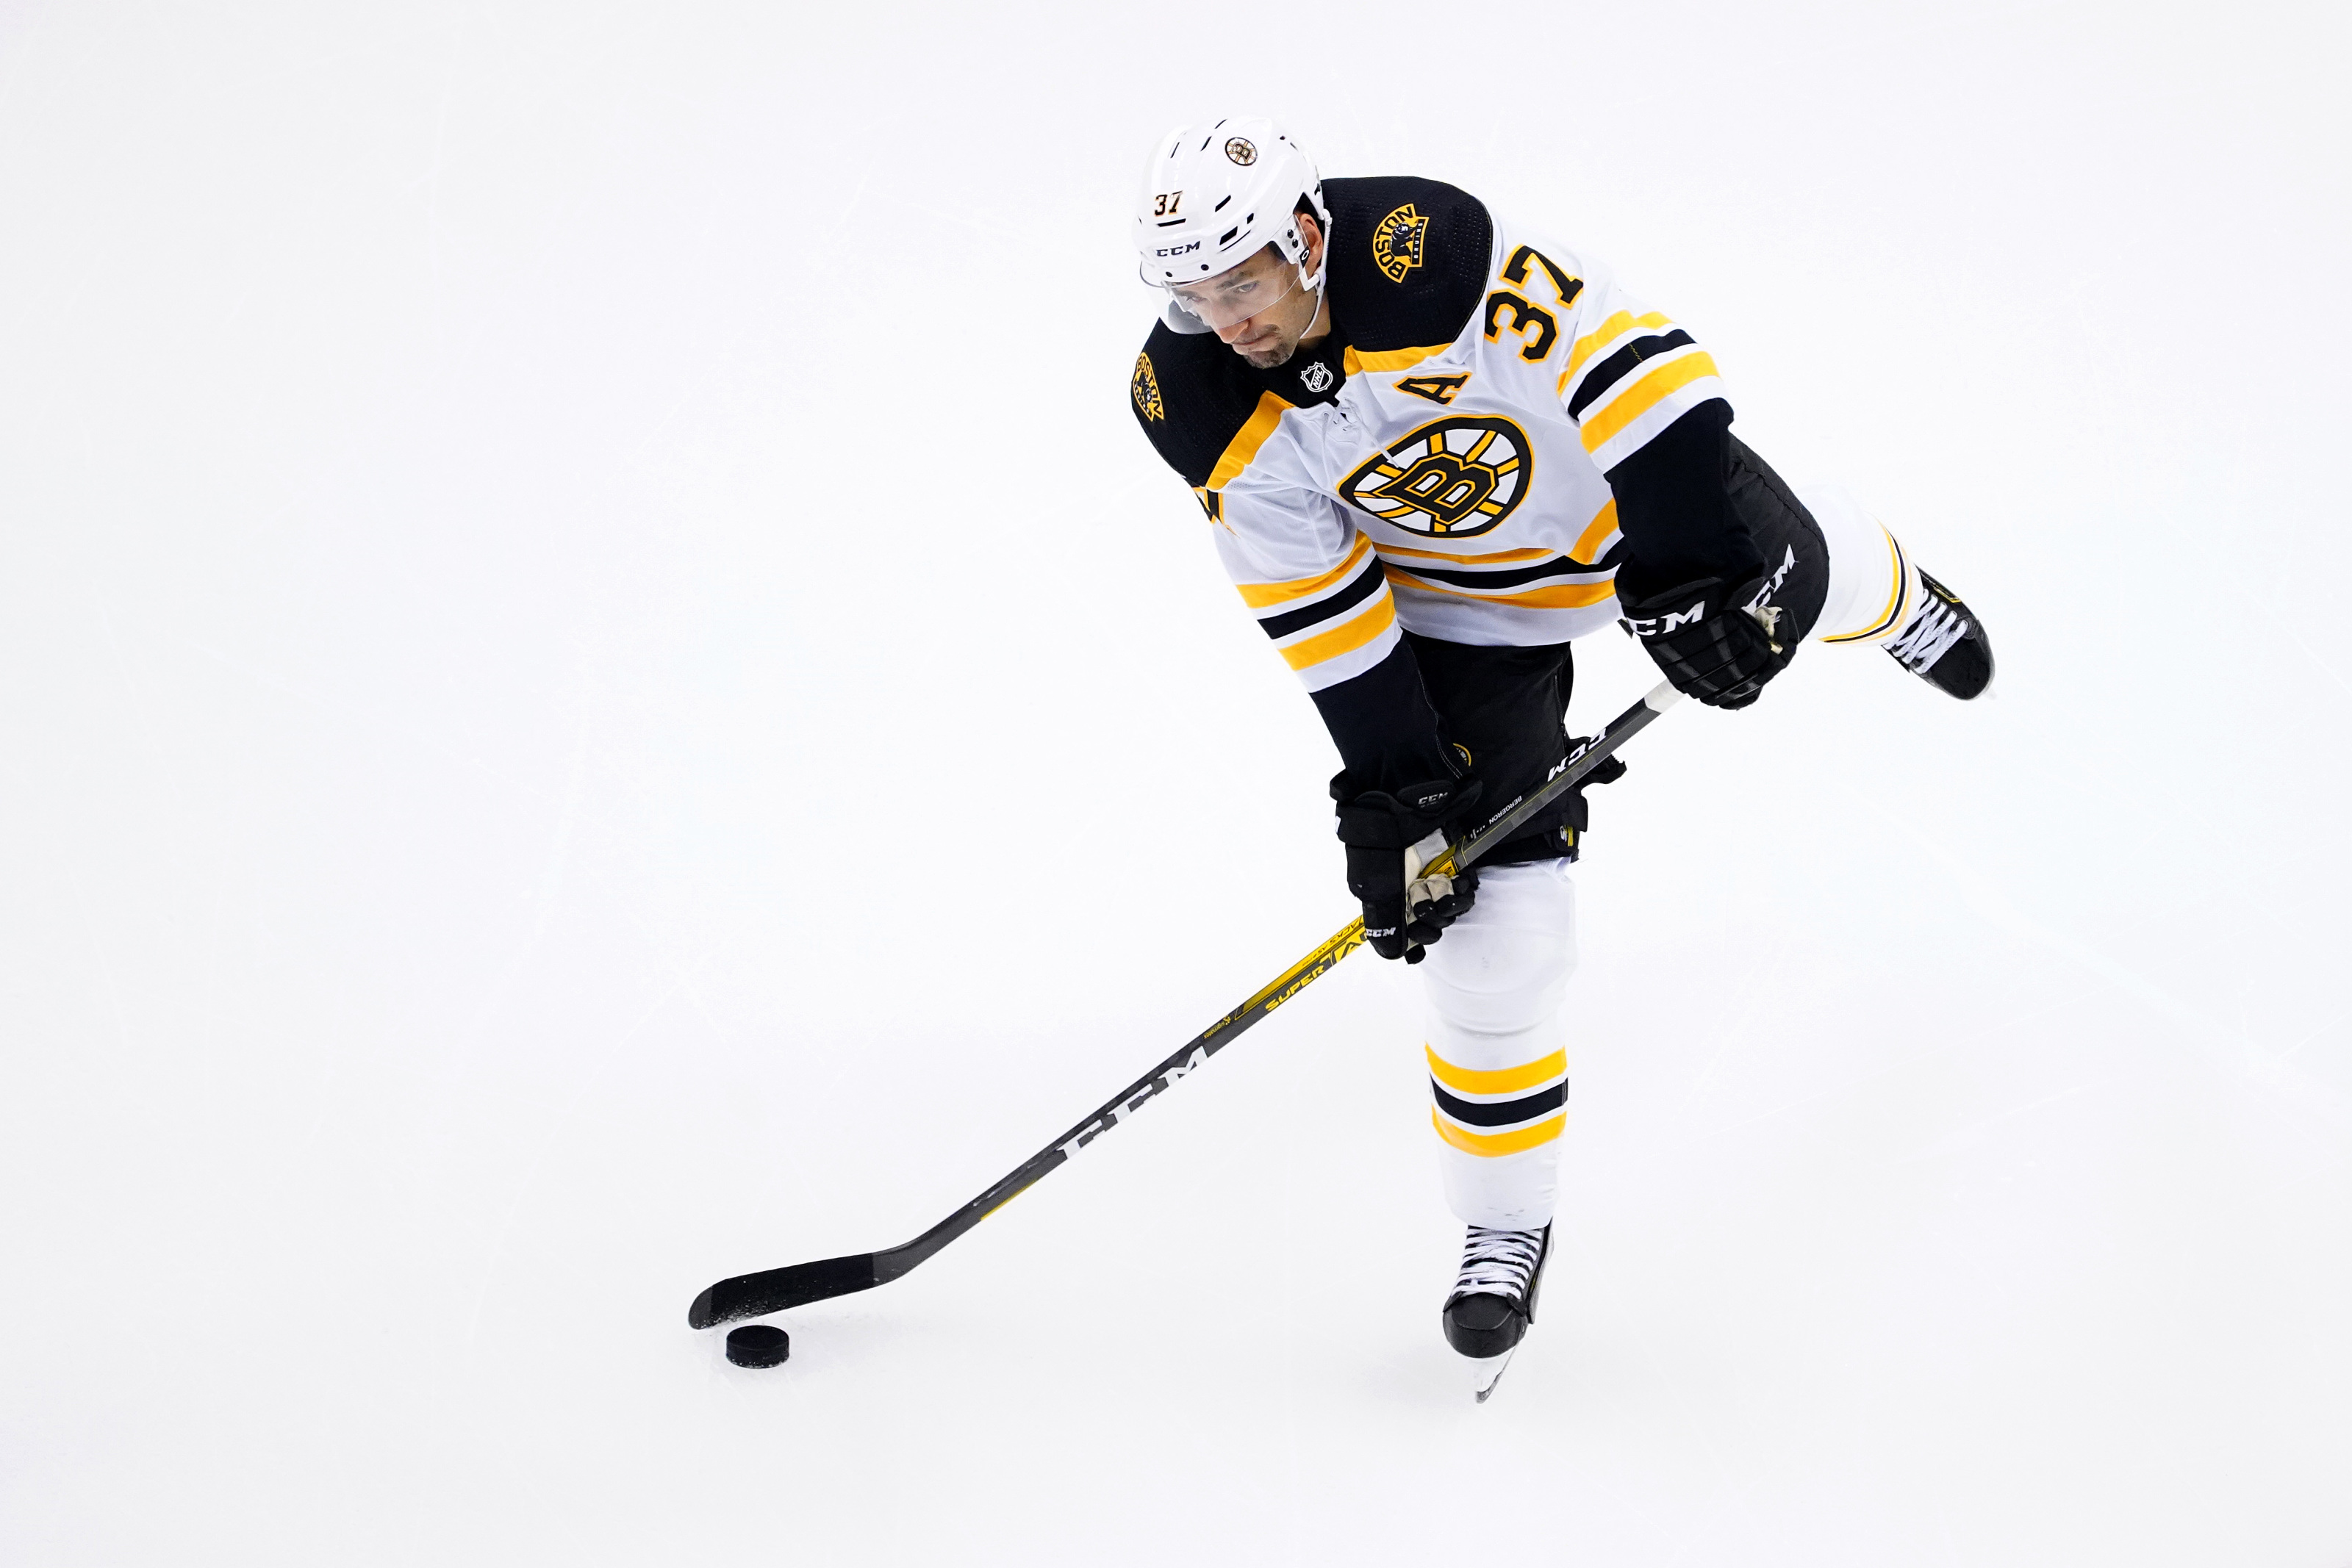 Patrice Bergeron plans to take some time before deciding his future